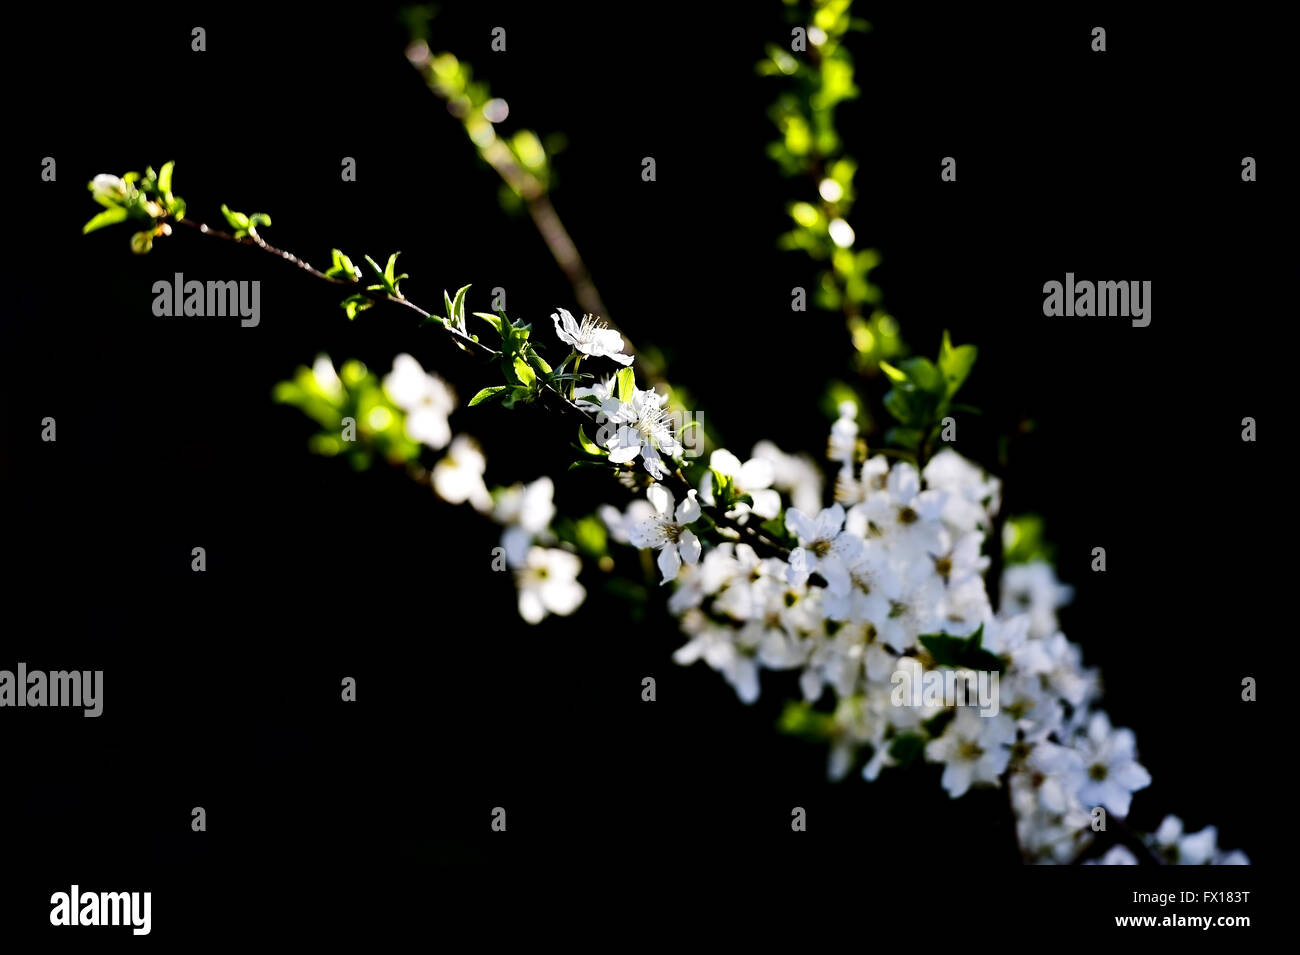 Blooming white cherry flowers on a tree in springtime with black background Stock Photo